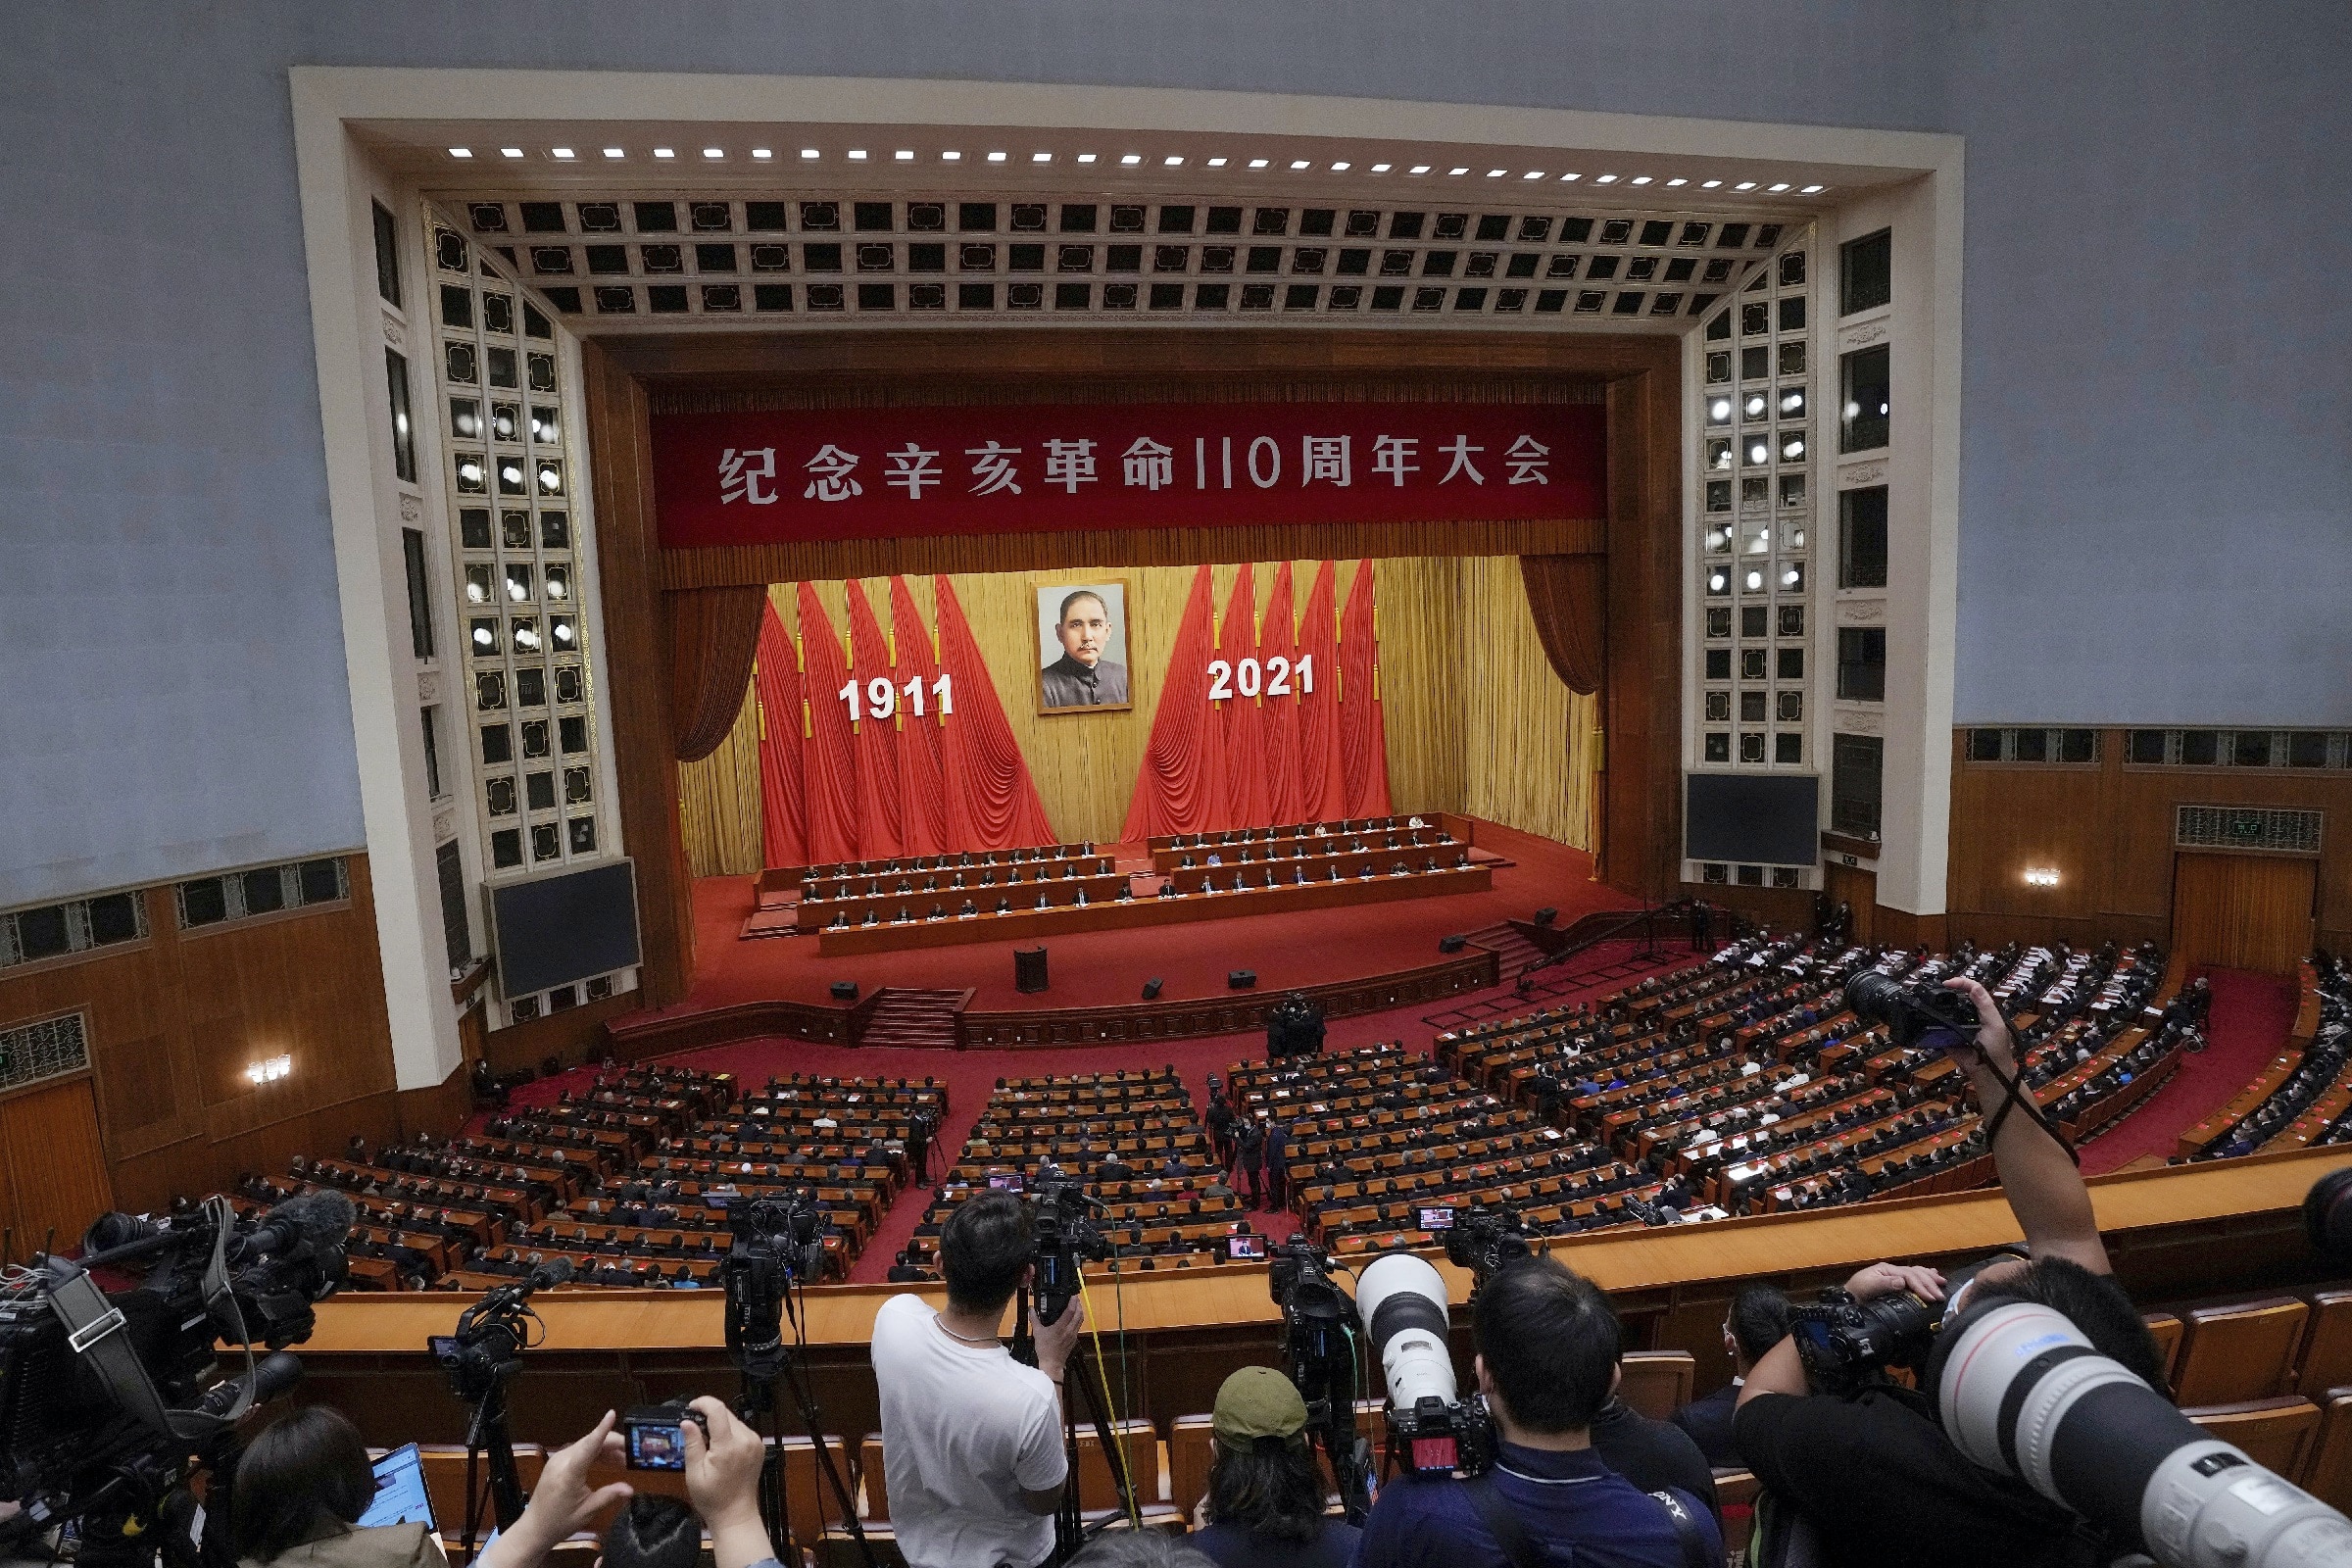 Chinese President Xi Jinping delivers a speech at an event commemorating the 110th anniversary of Xinhai Revolution.